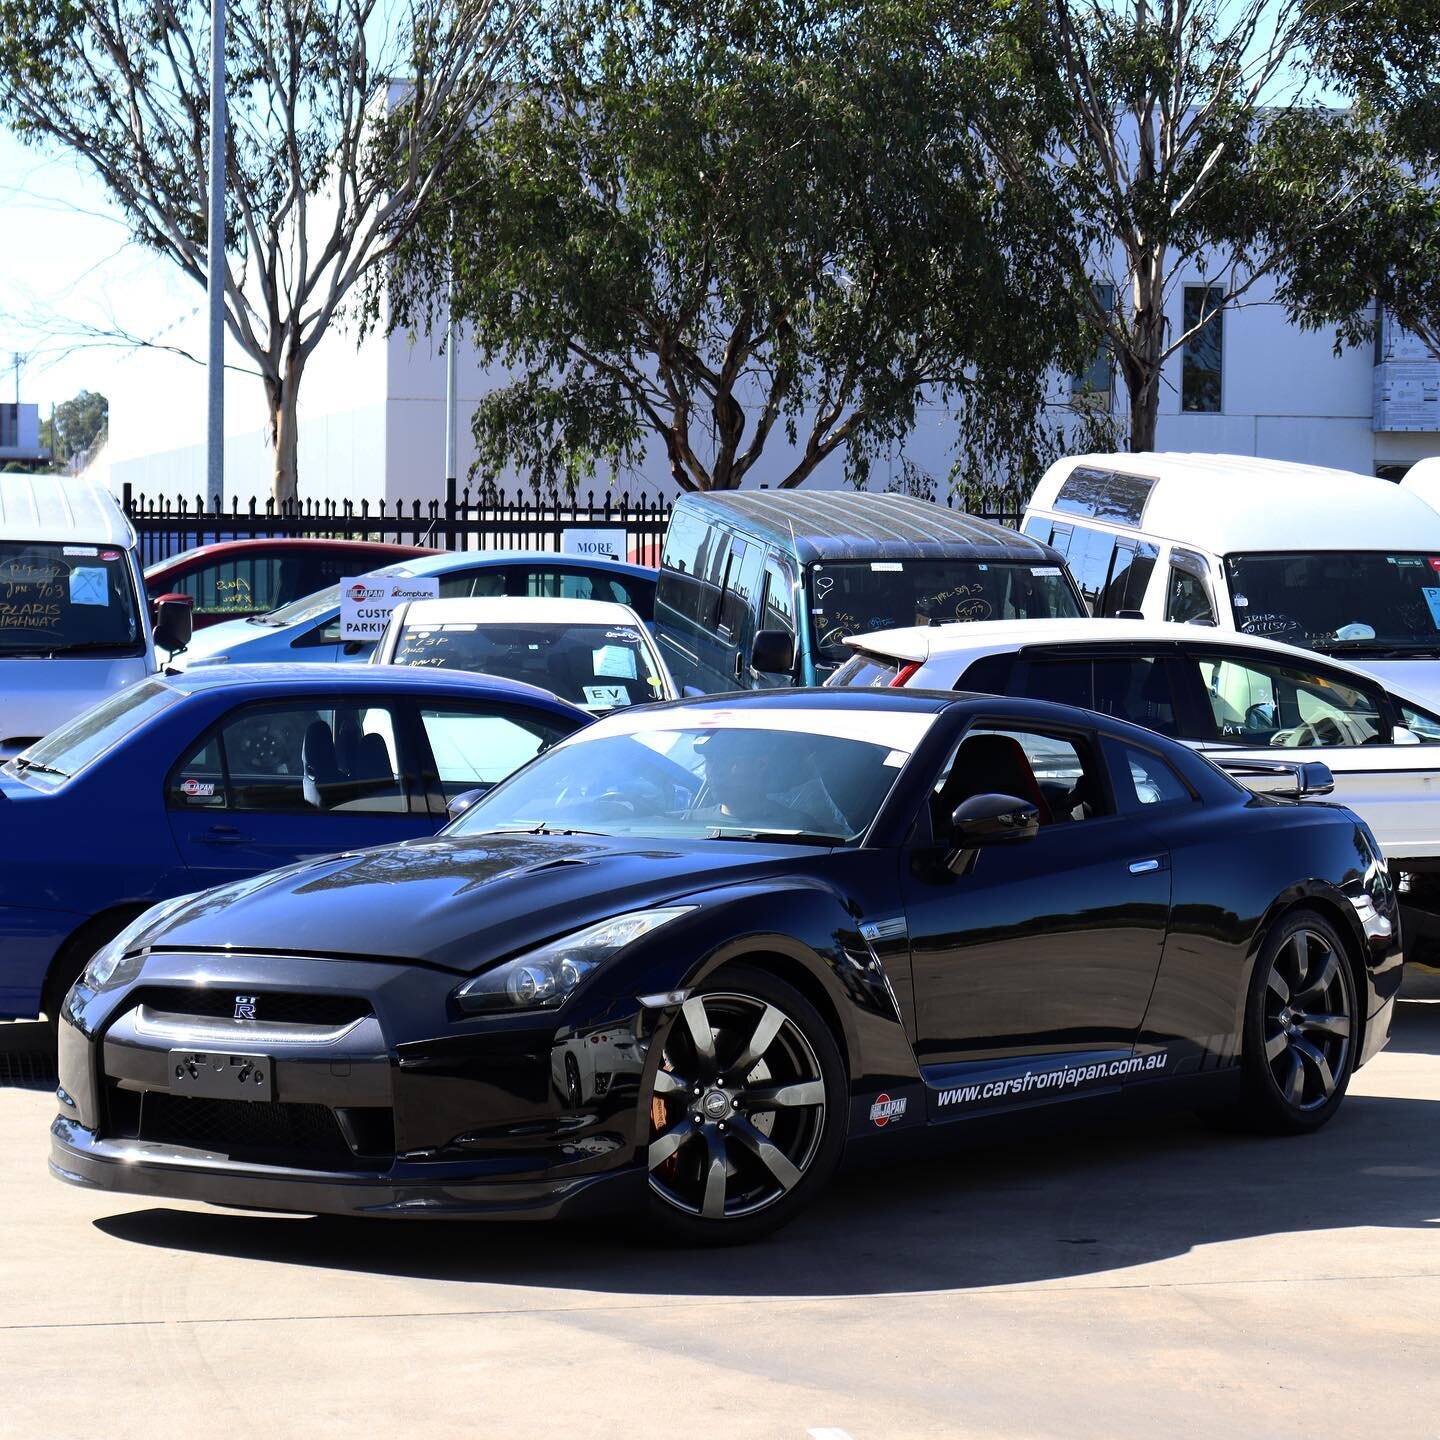 With the GTR Festival coming soon, check out our range of R35 GTRs! 💪

If you see something that&rsquo;s not on our website make sure to DM or call us 🤝

📲 DM us for more info/pictures
📞 Call us on 0431 555 563
📧 Email us @ carsfromjapan888@gmai